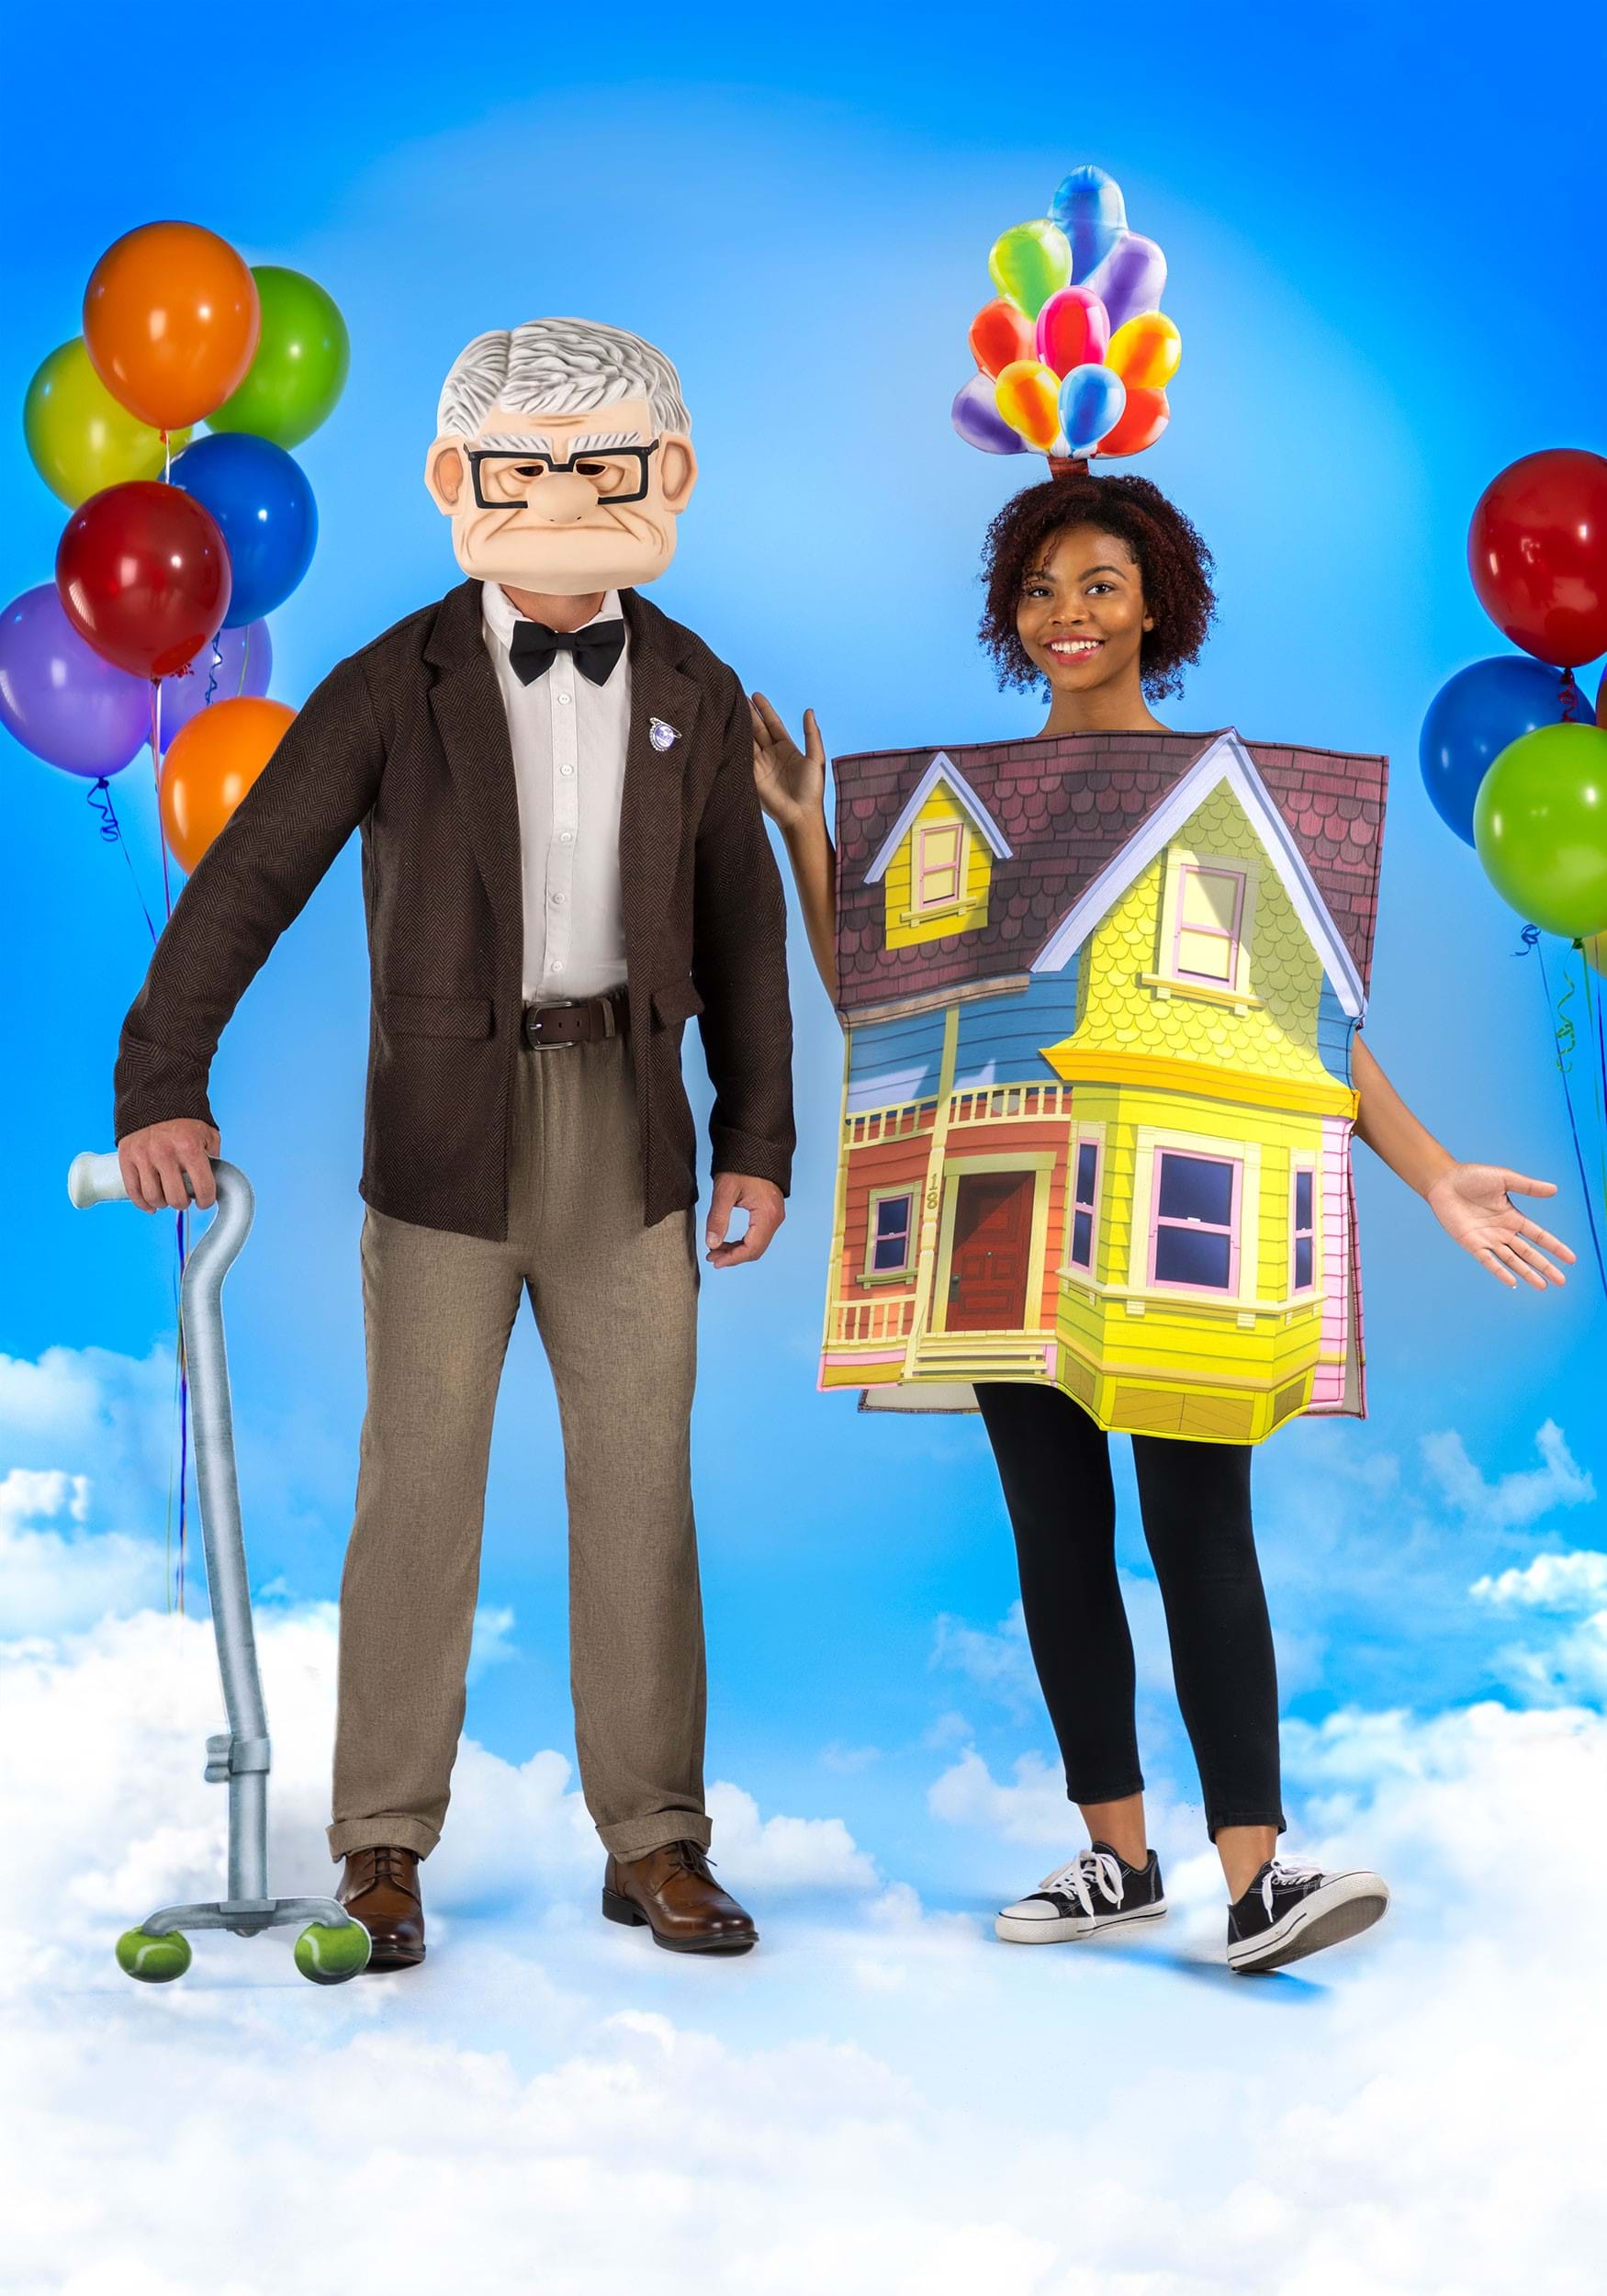 https://images.halloweencostumes.ca/products/75649/2-1-292257/adult-up-house-costume-alt-1.jpg